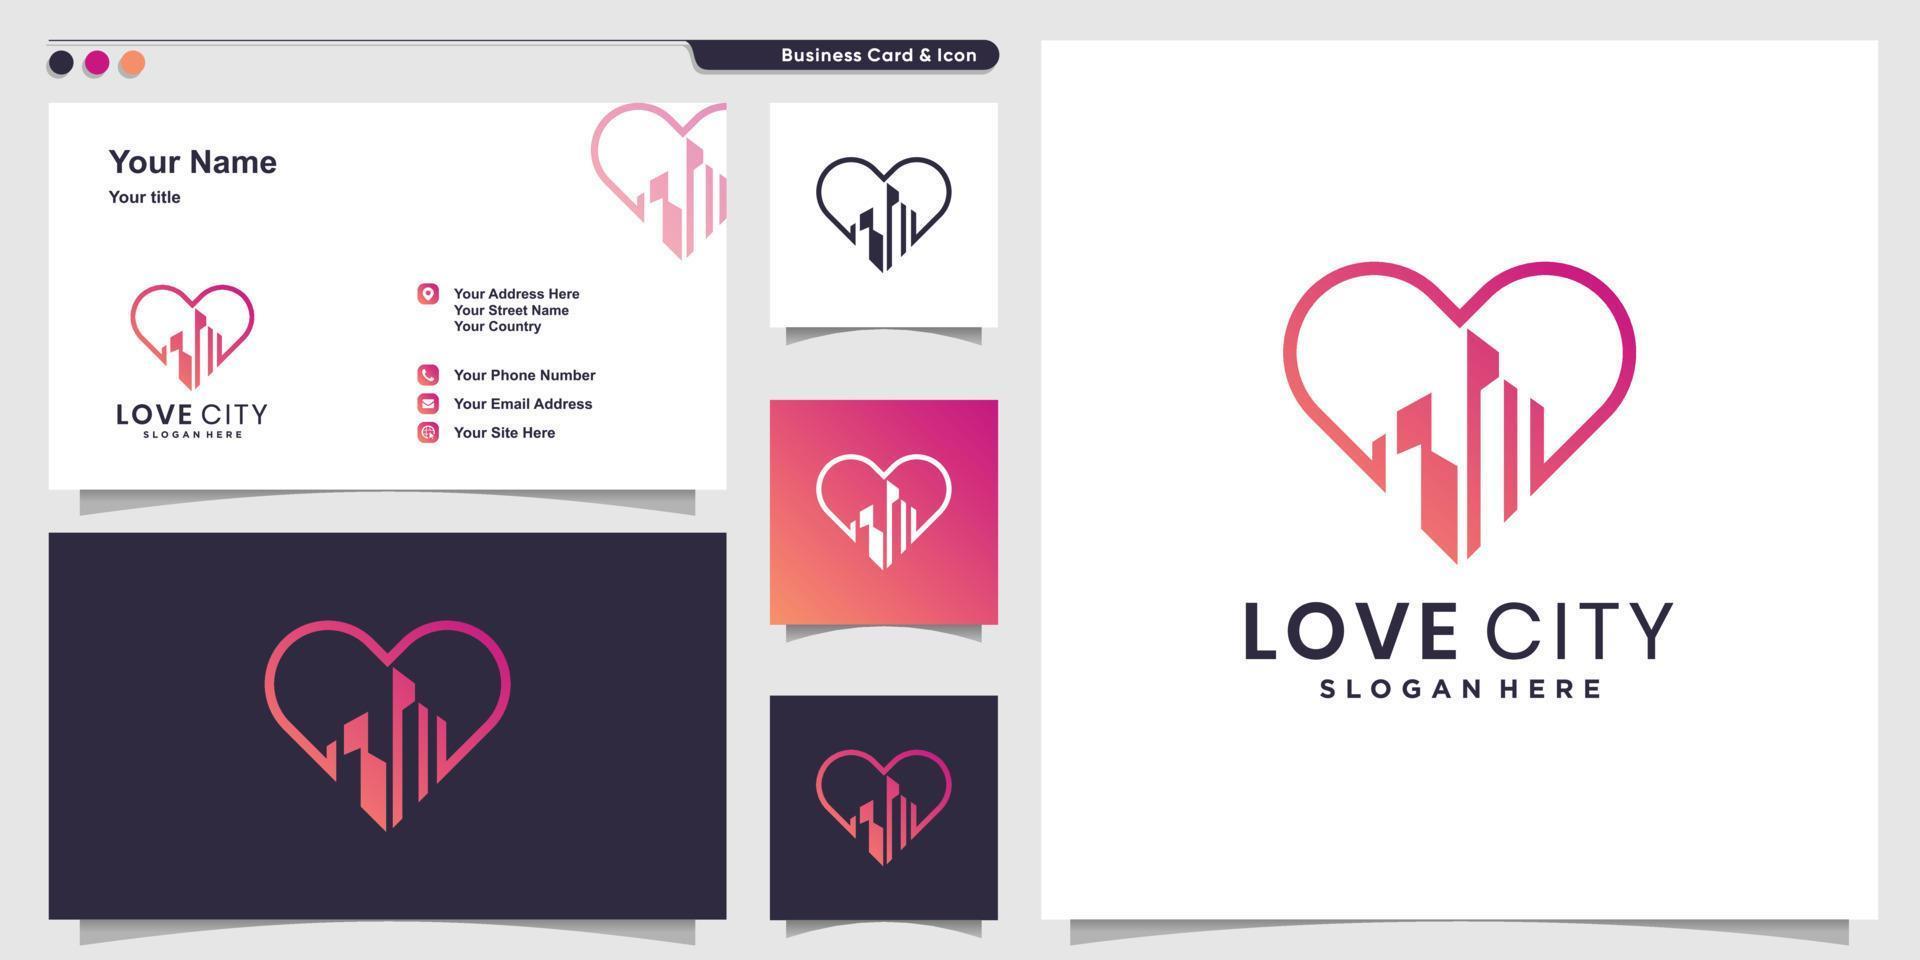 Love city logo with modern line art style and business card design template Premium Vector